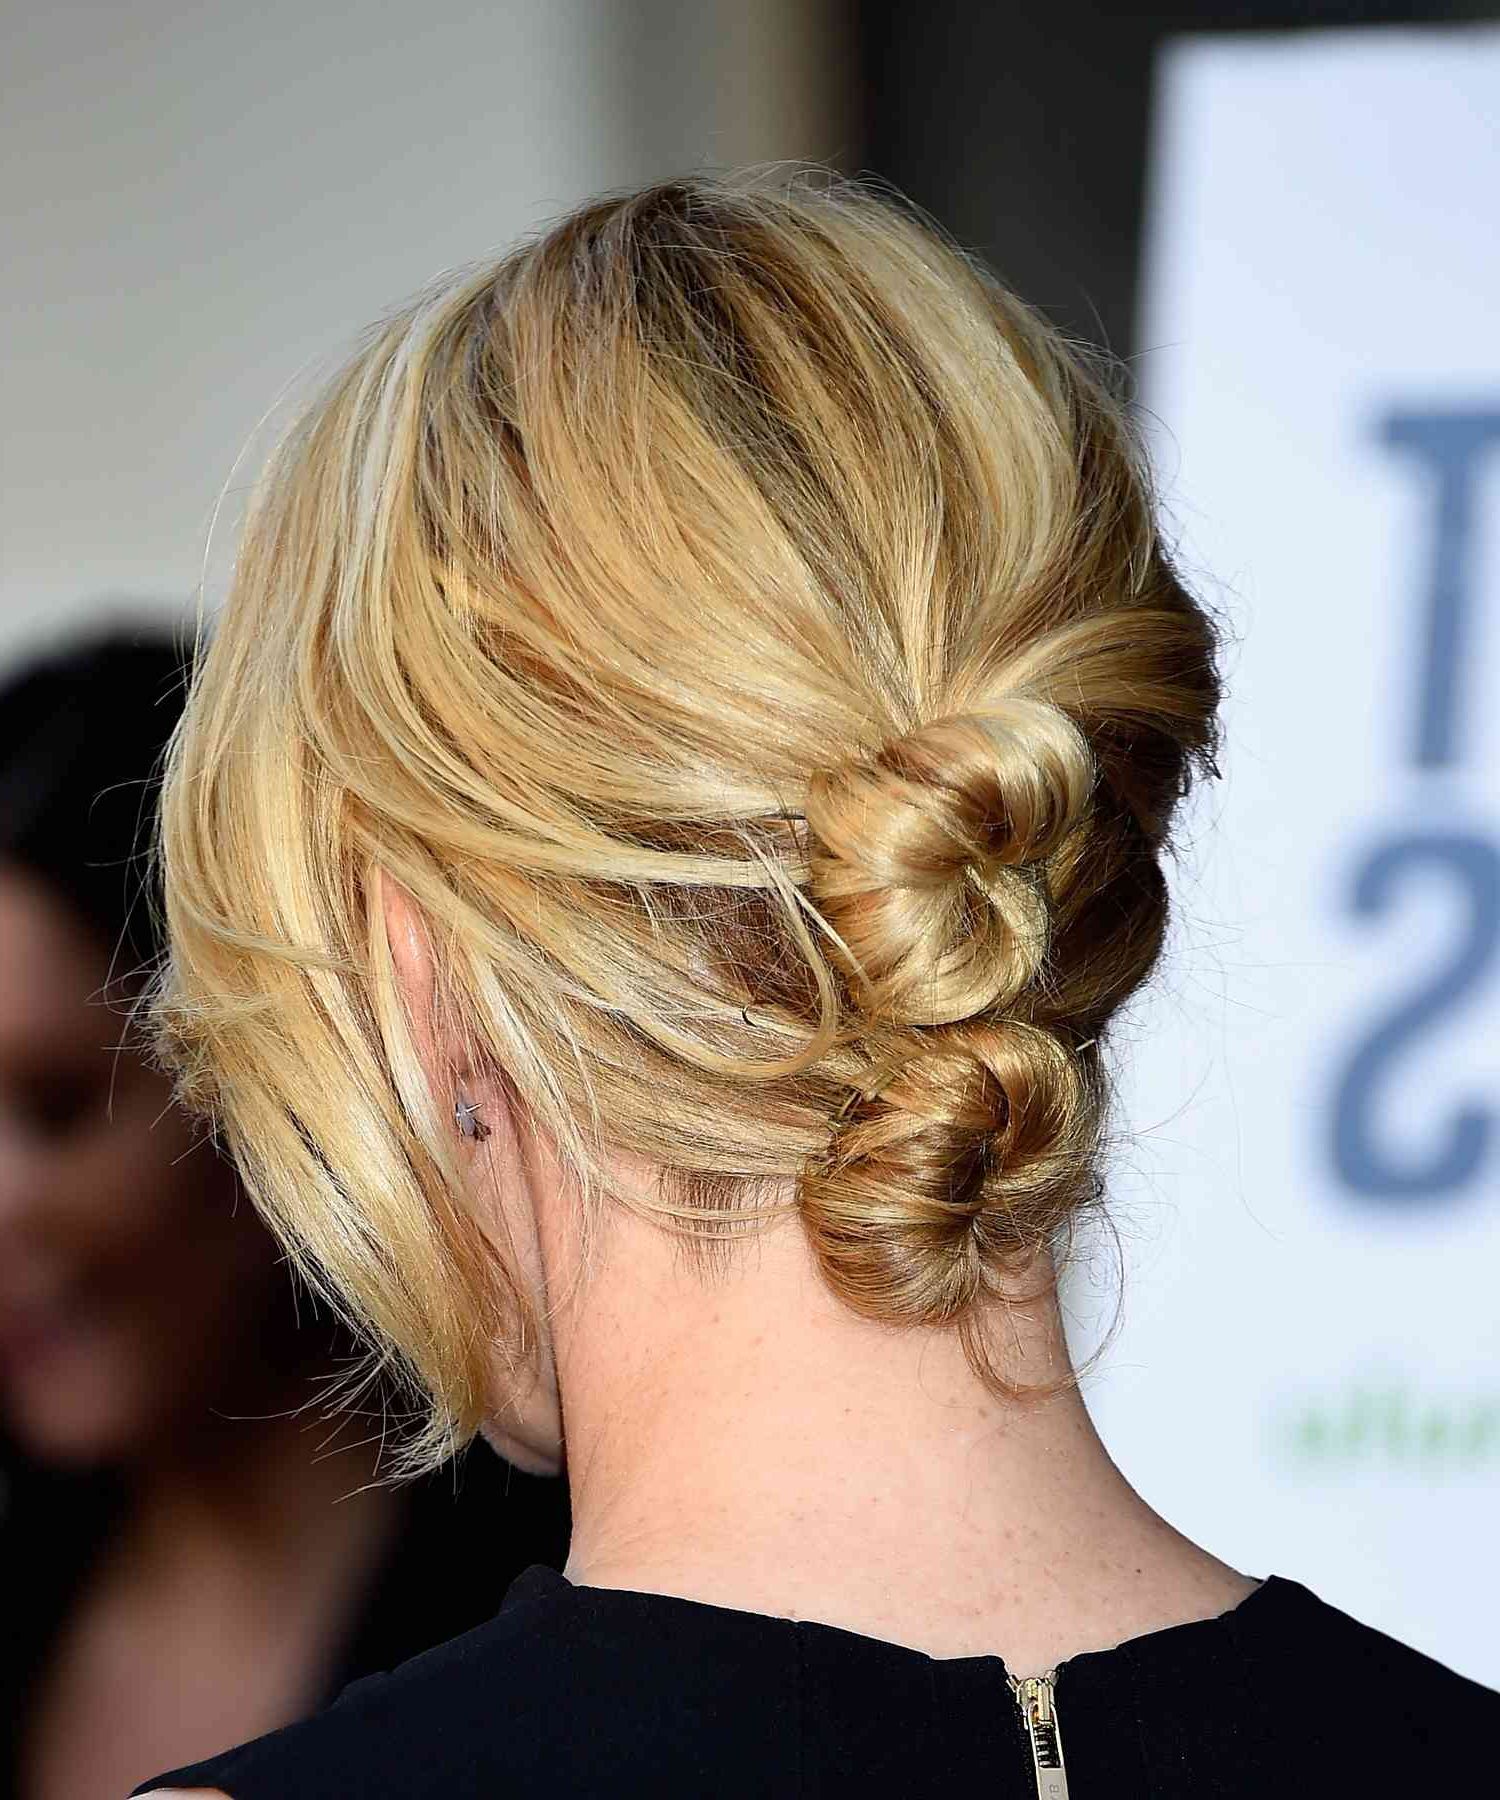 35 Updos For Thin Hair (and How To Achieve Them) Regarding Easy Updo For Long Fine Hair (View 8 of 25)